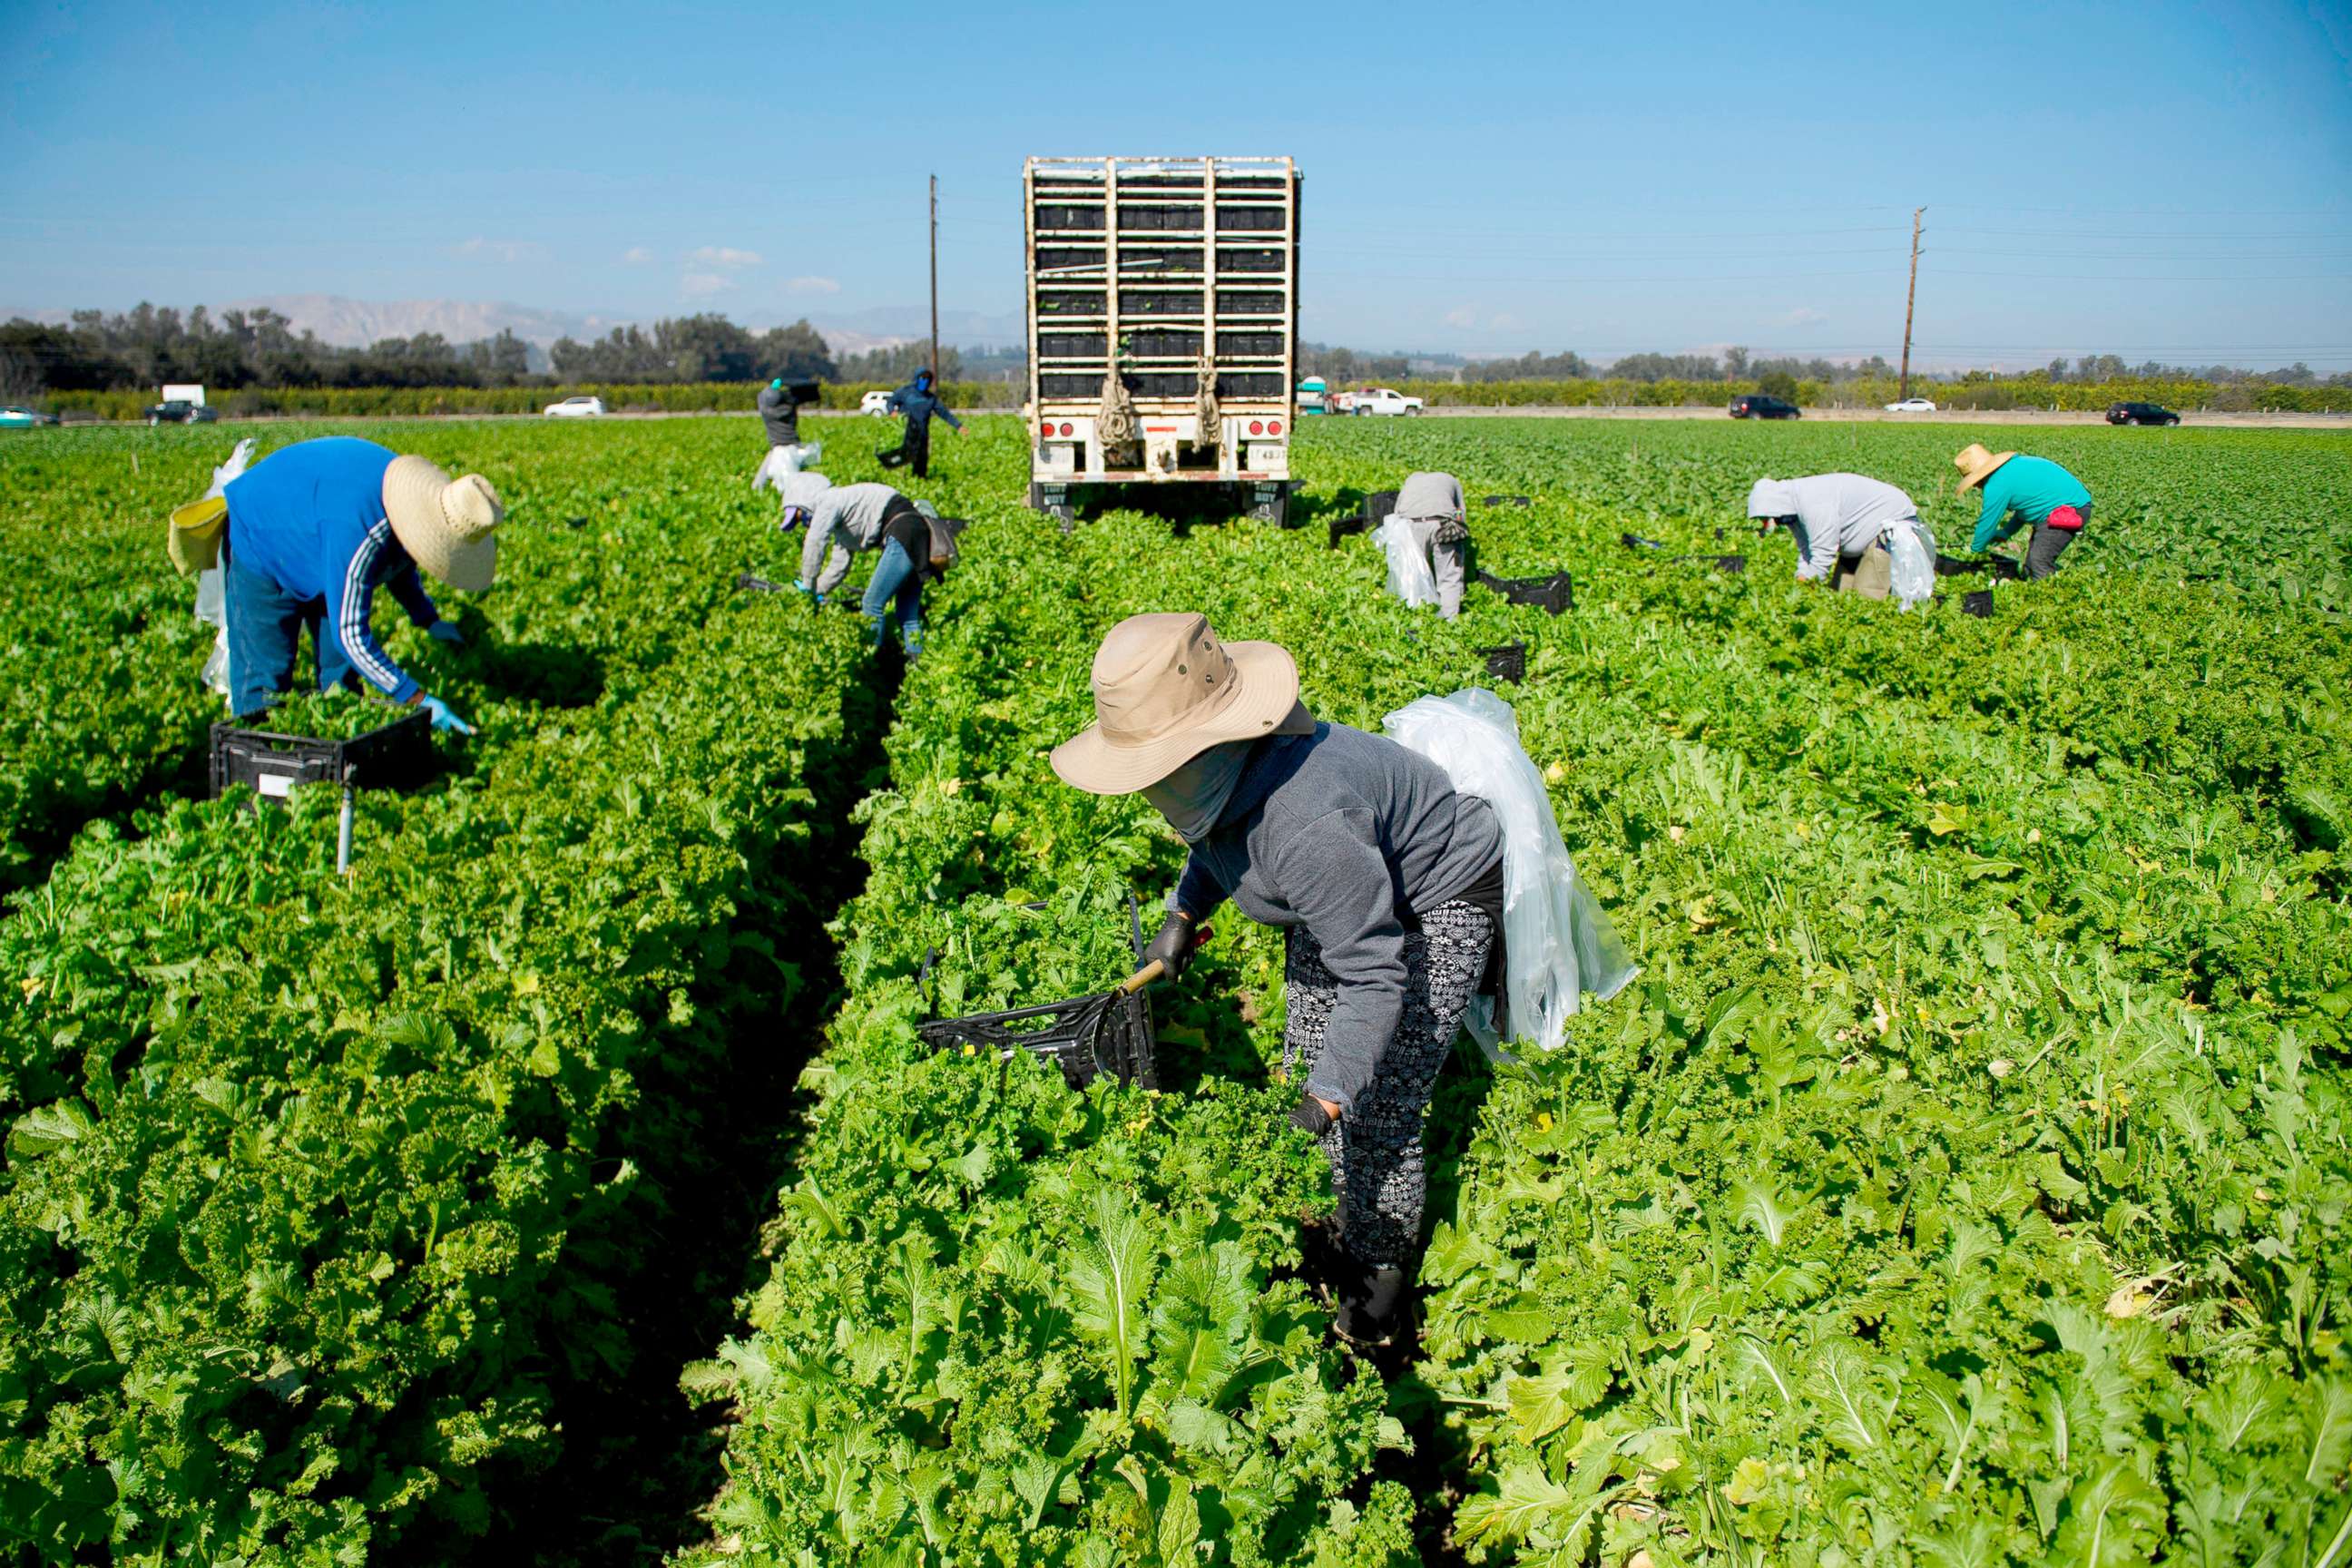 PHOTO: Farmworkers wear face masks while harvesting curly mustard in a field in Ventura County, Calif., Feb. 10, 2021.